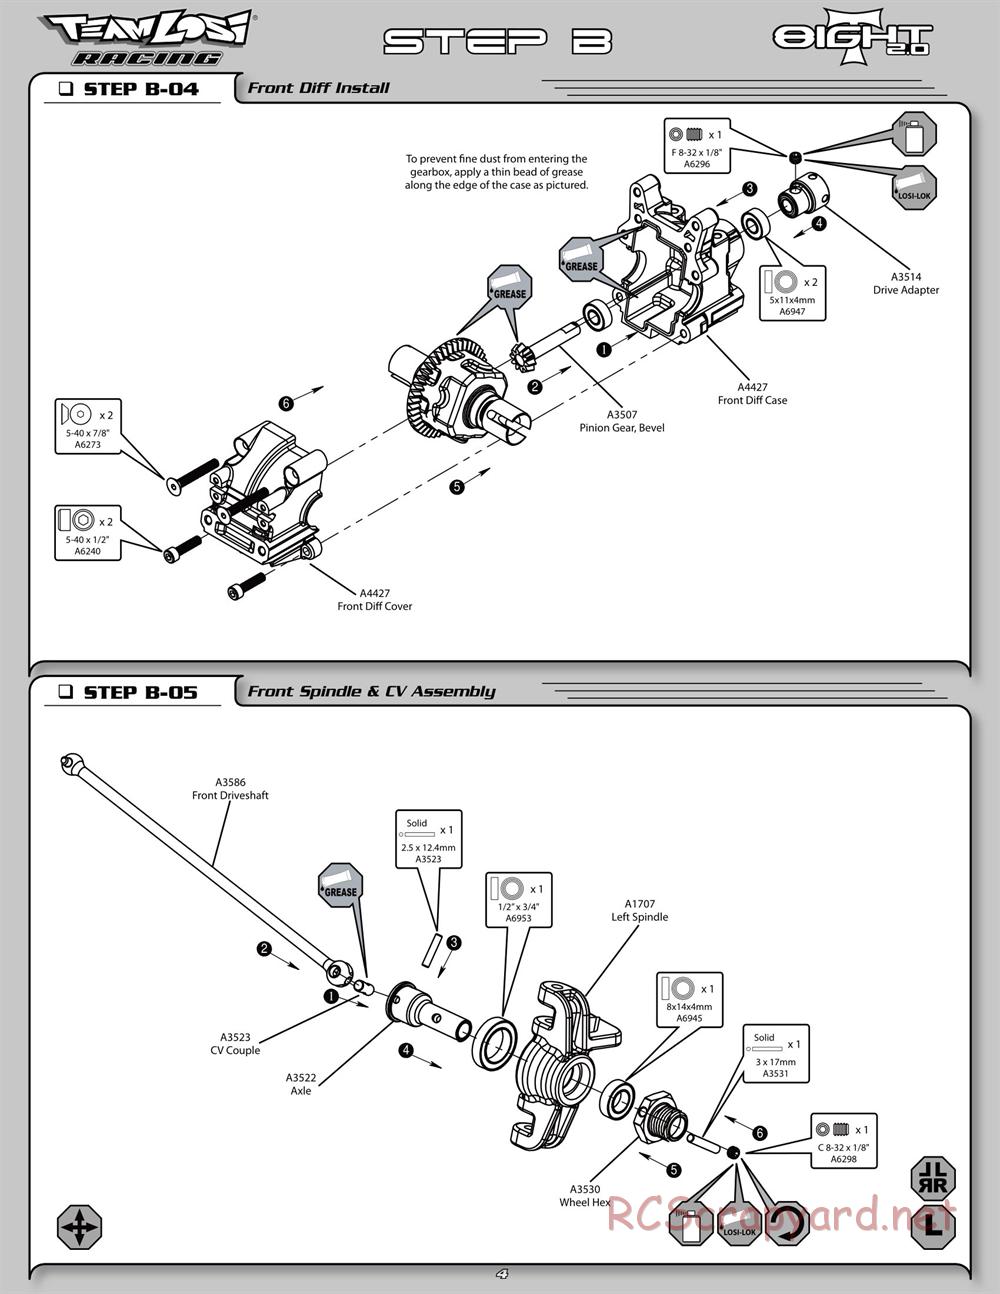 Team Losi - 8ight-T 2.0 Race Roller - Manual - Page 9